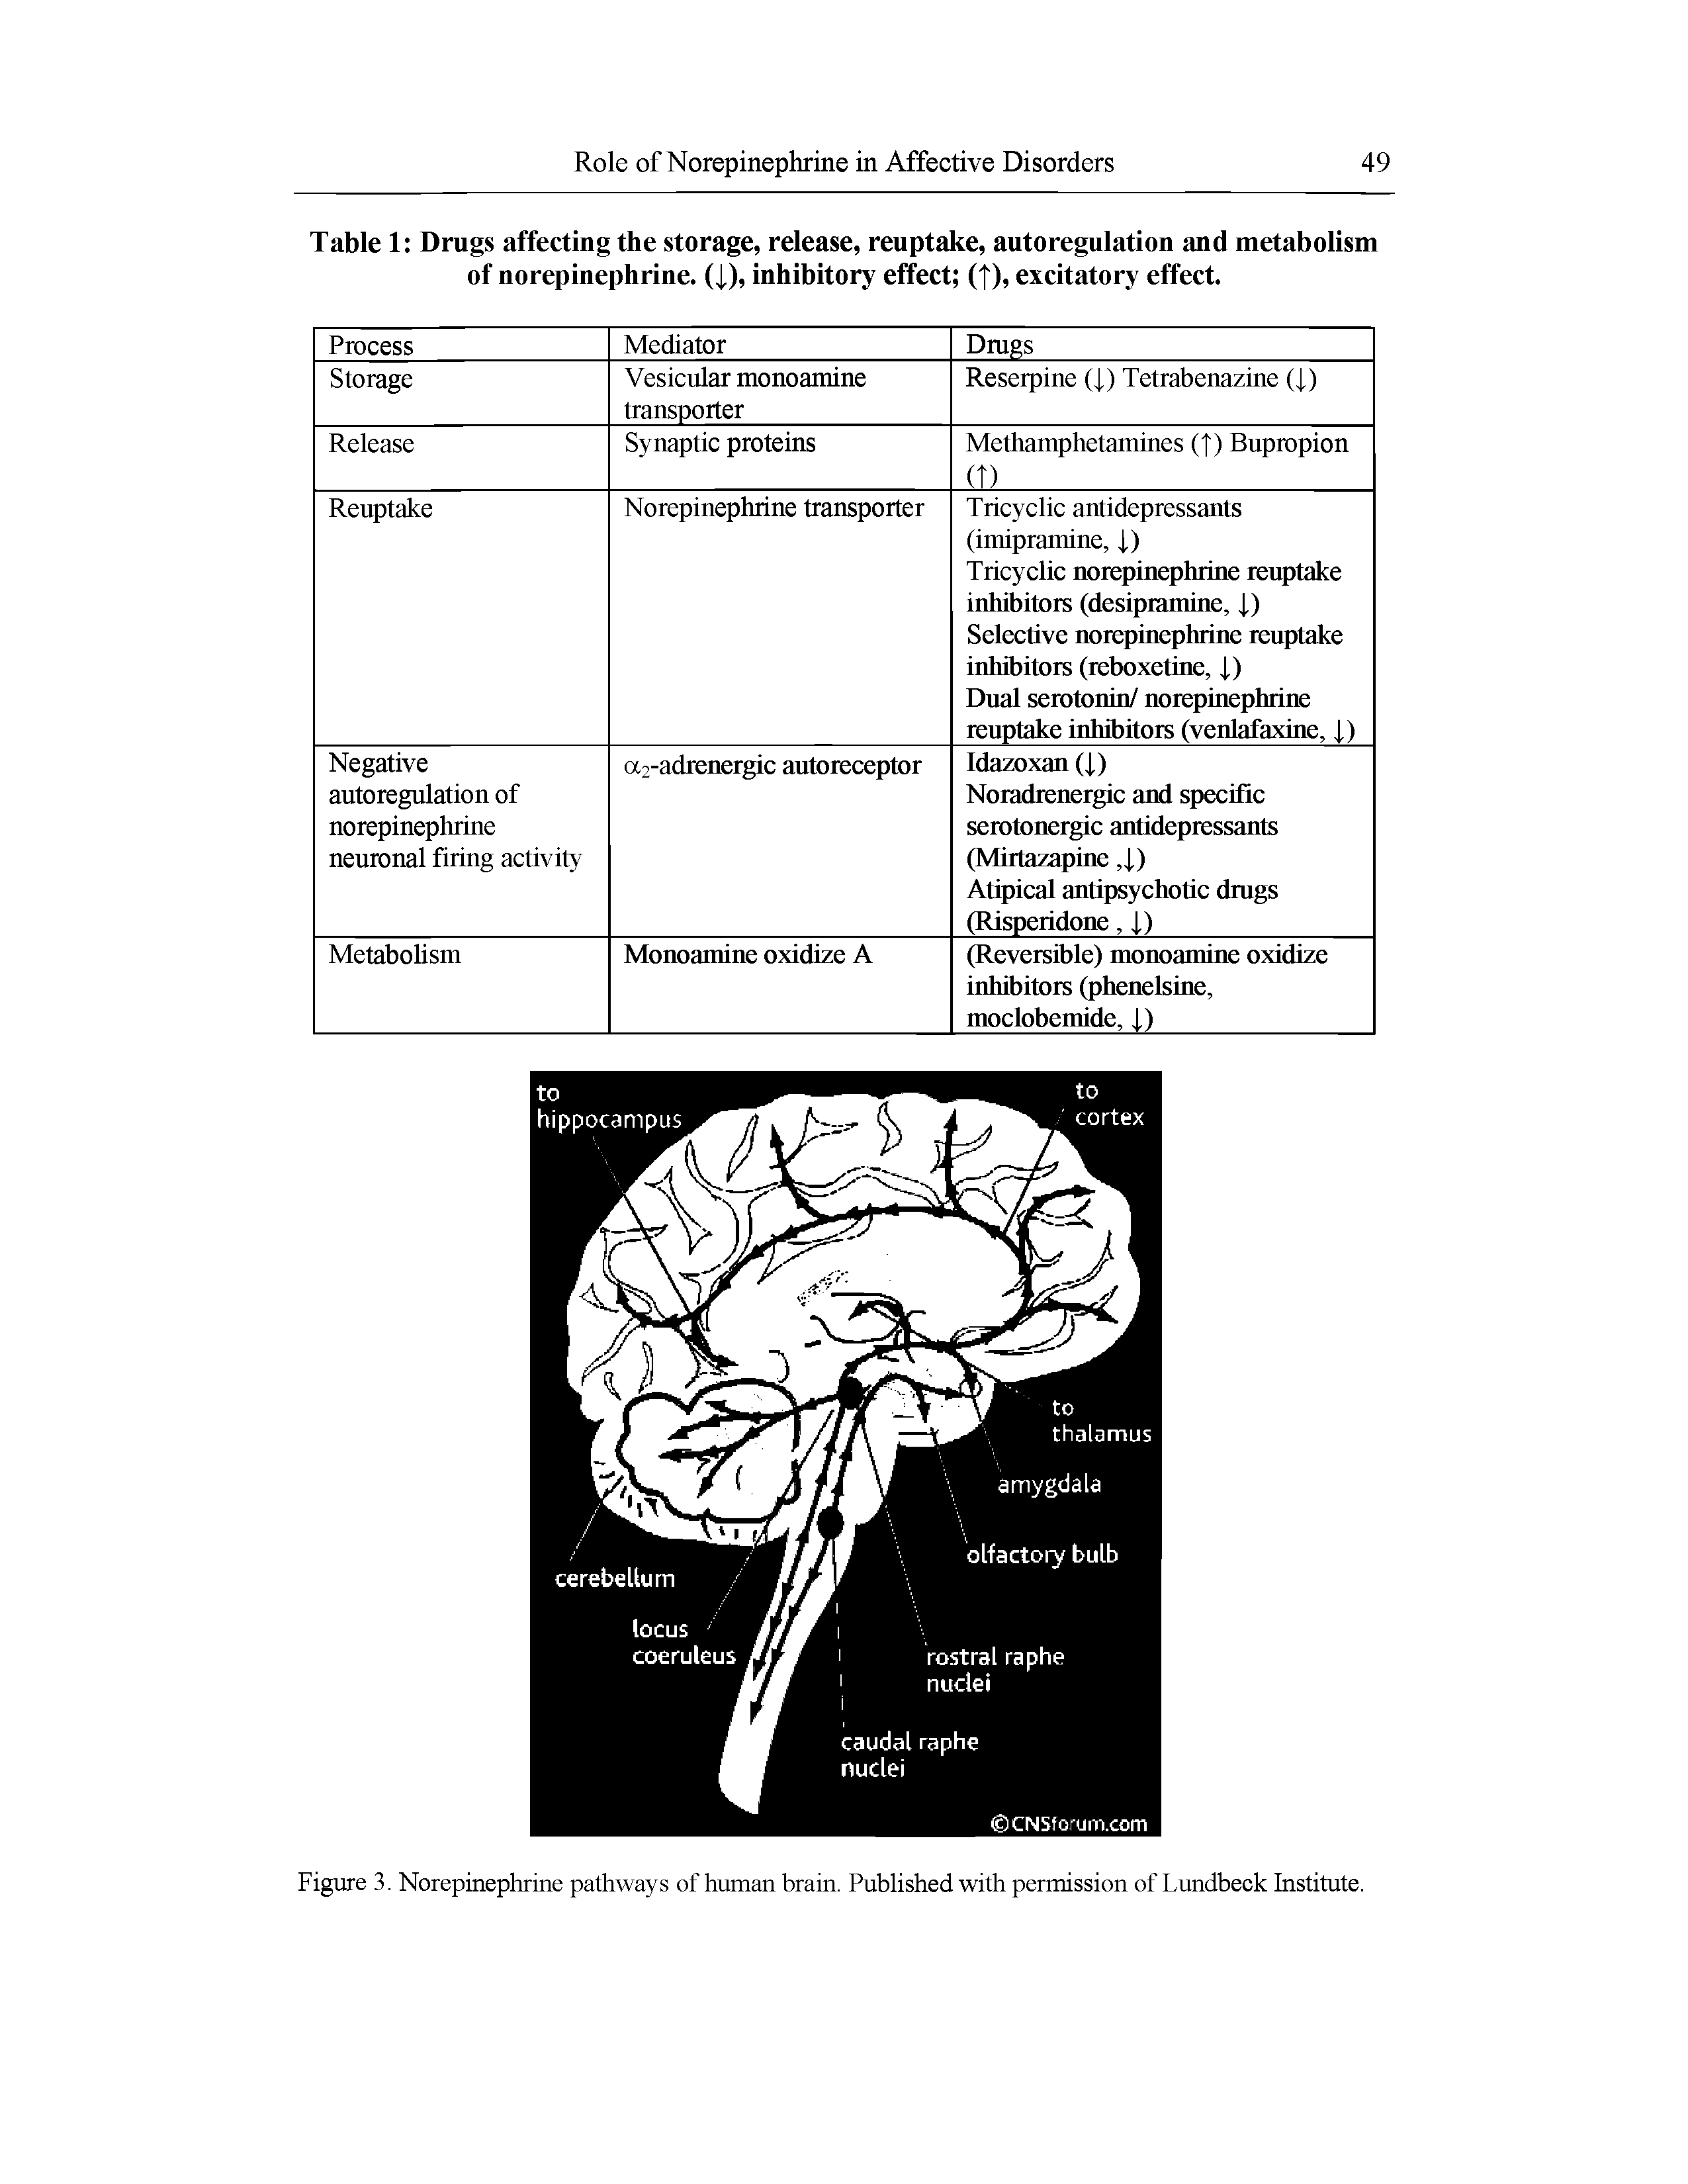 Figure 3. Norepinephrine pathways of human brain. Published with permission of Lundbeck Institute.